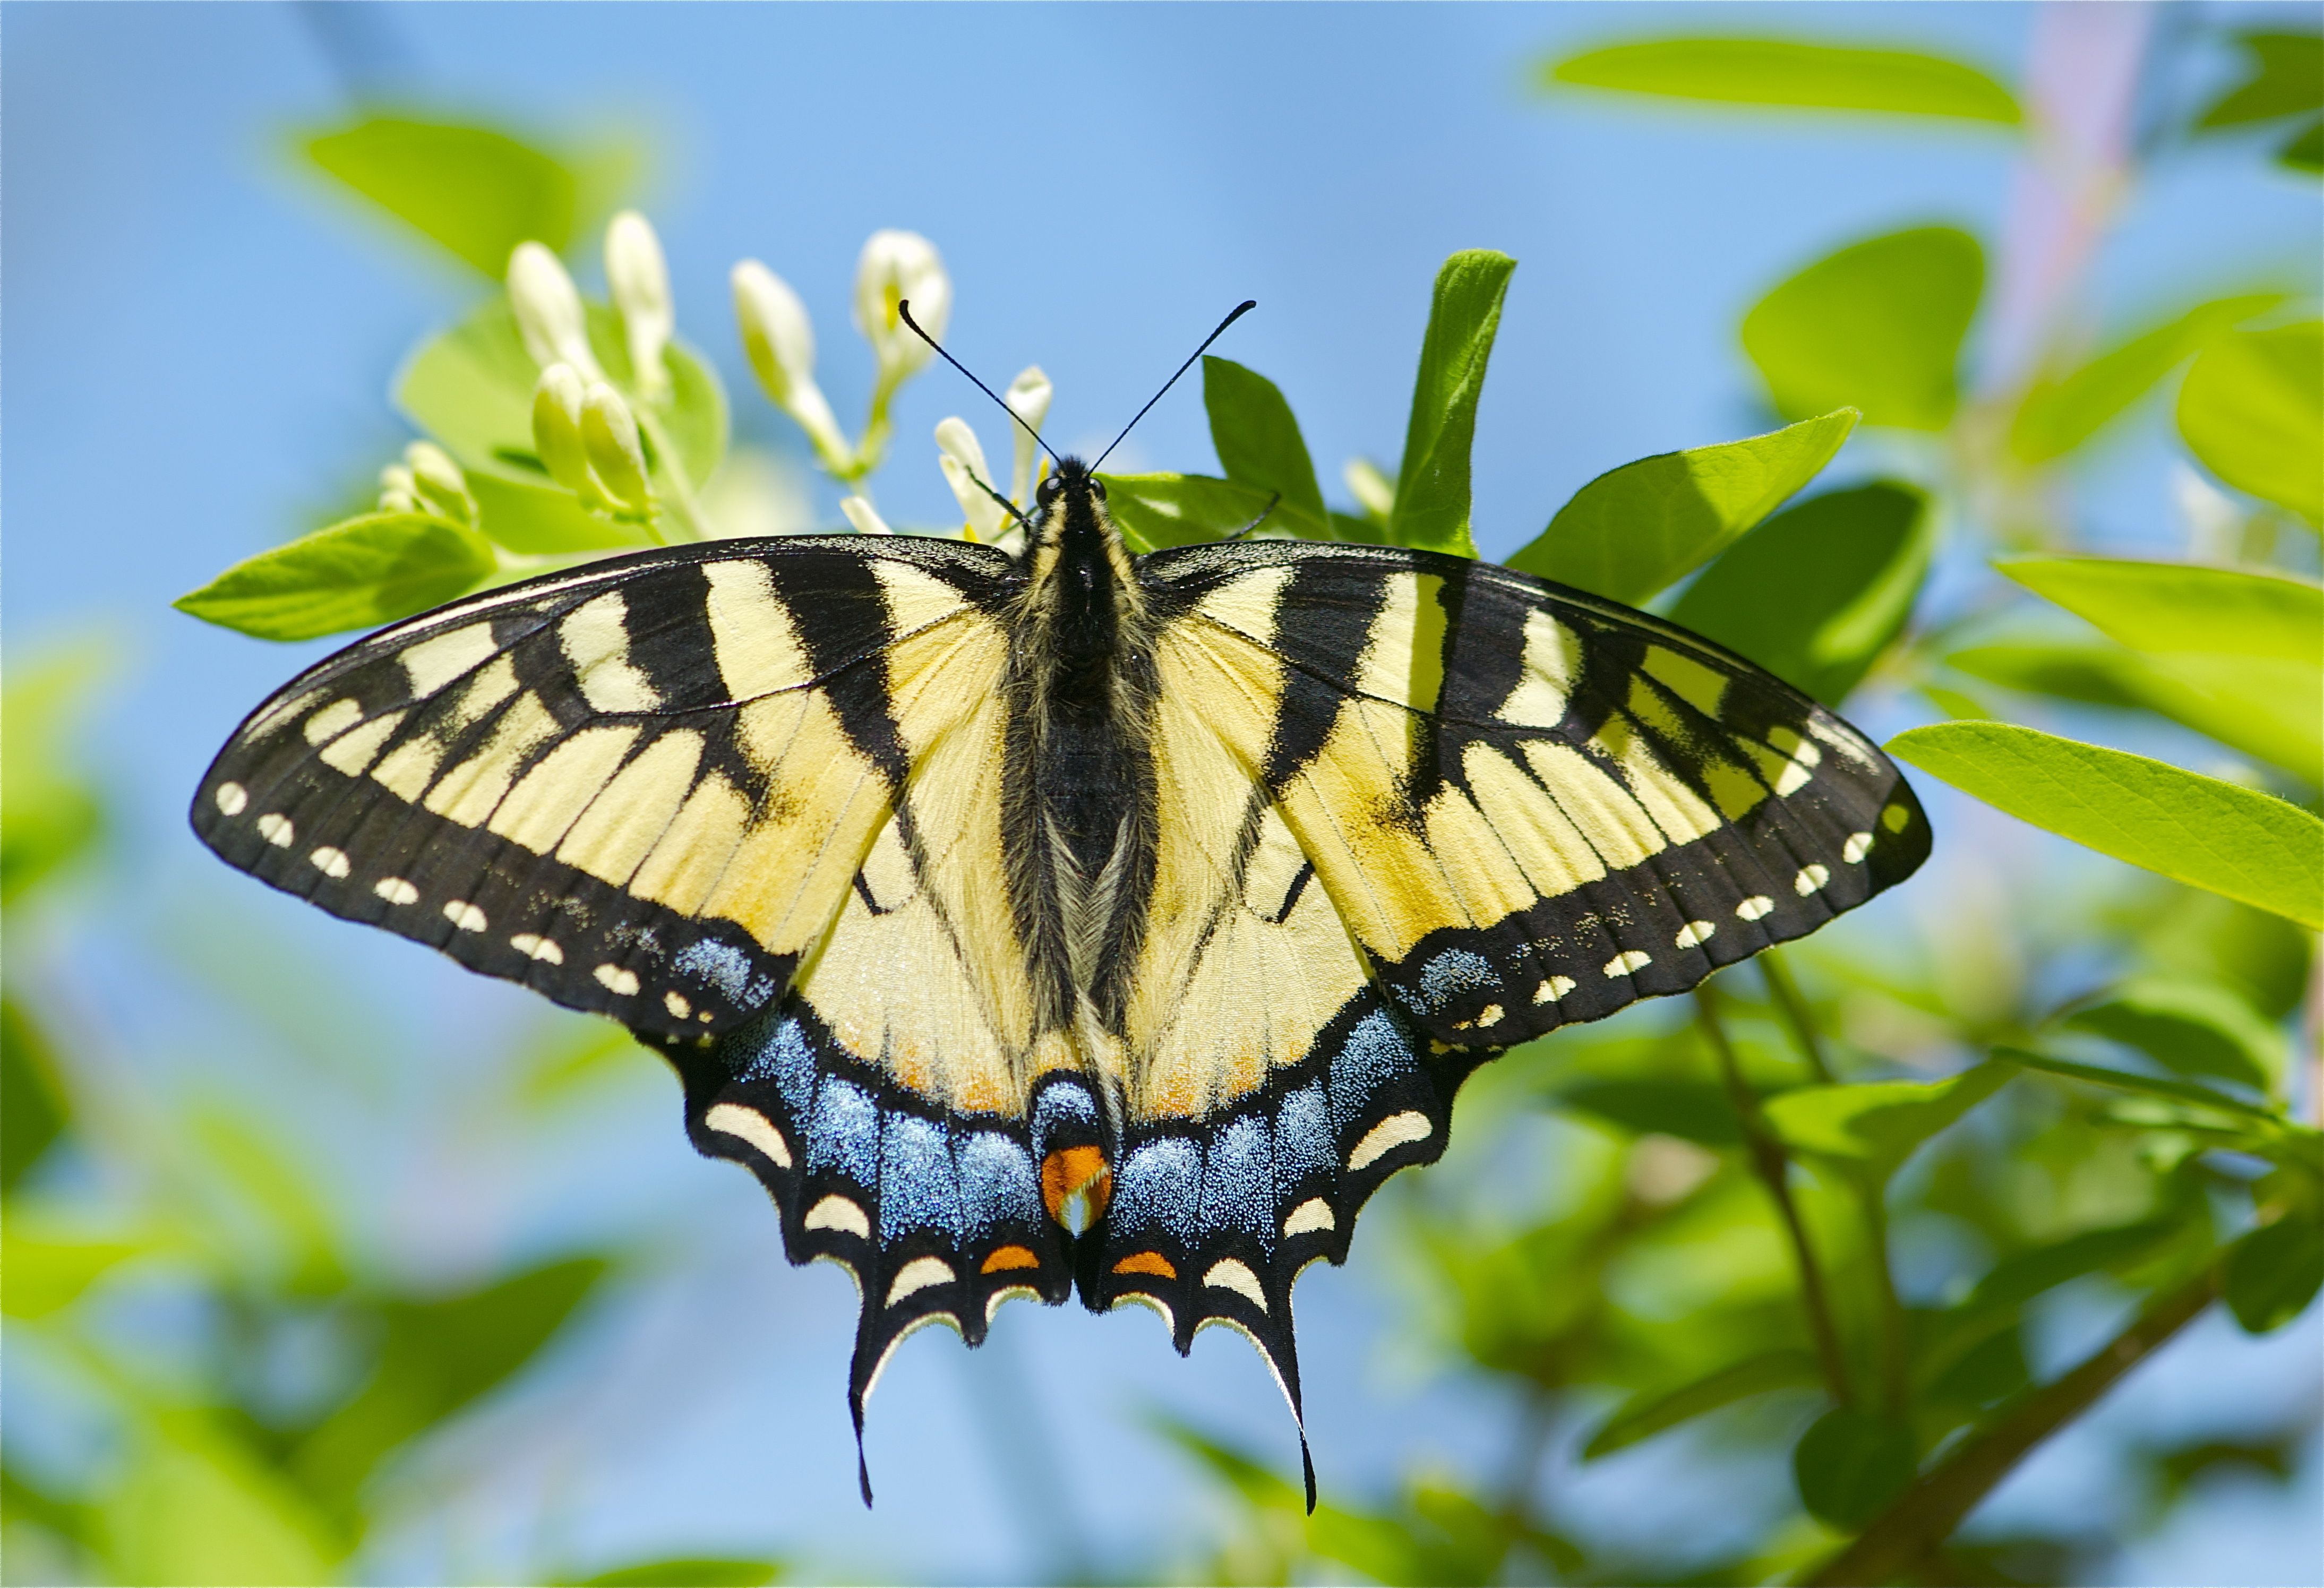 Swallowtail Butterfly on Honeysuckle. Butterfly background